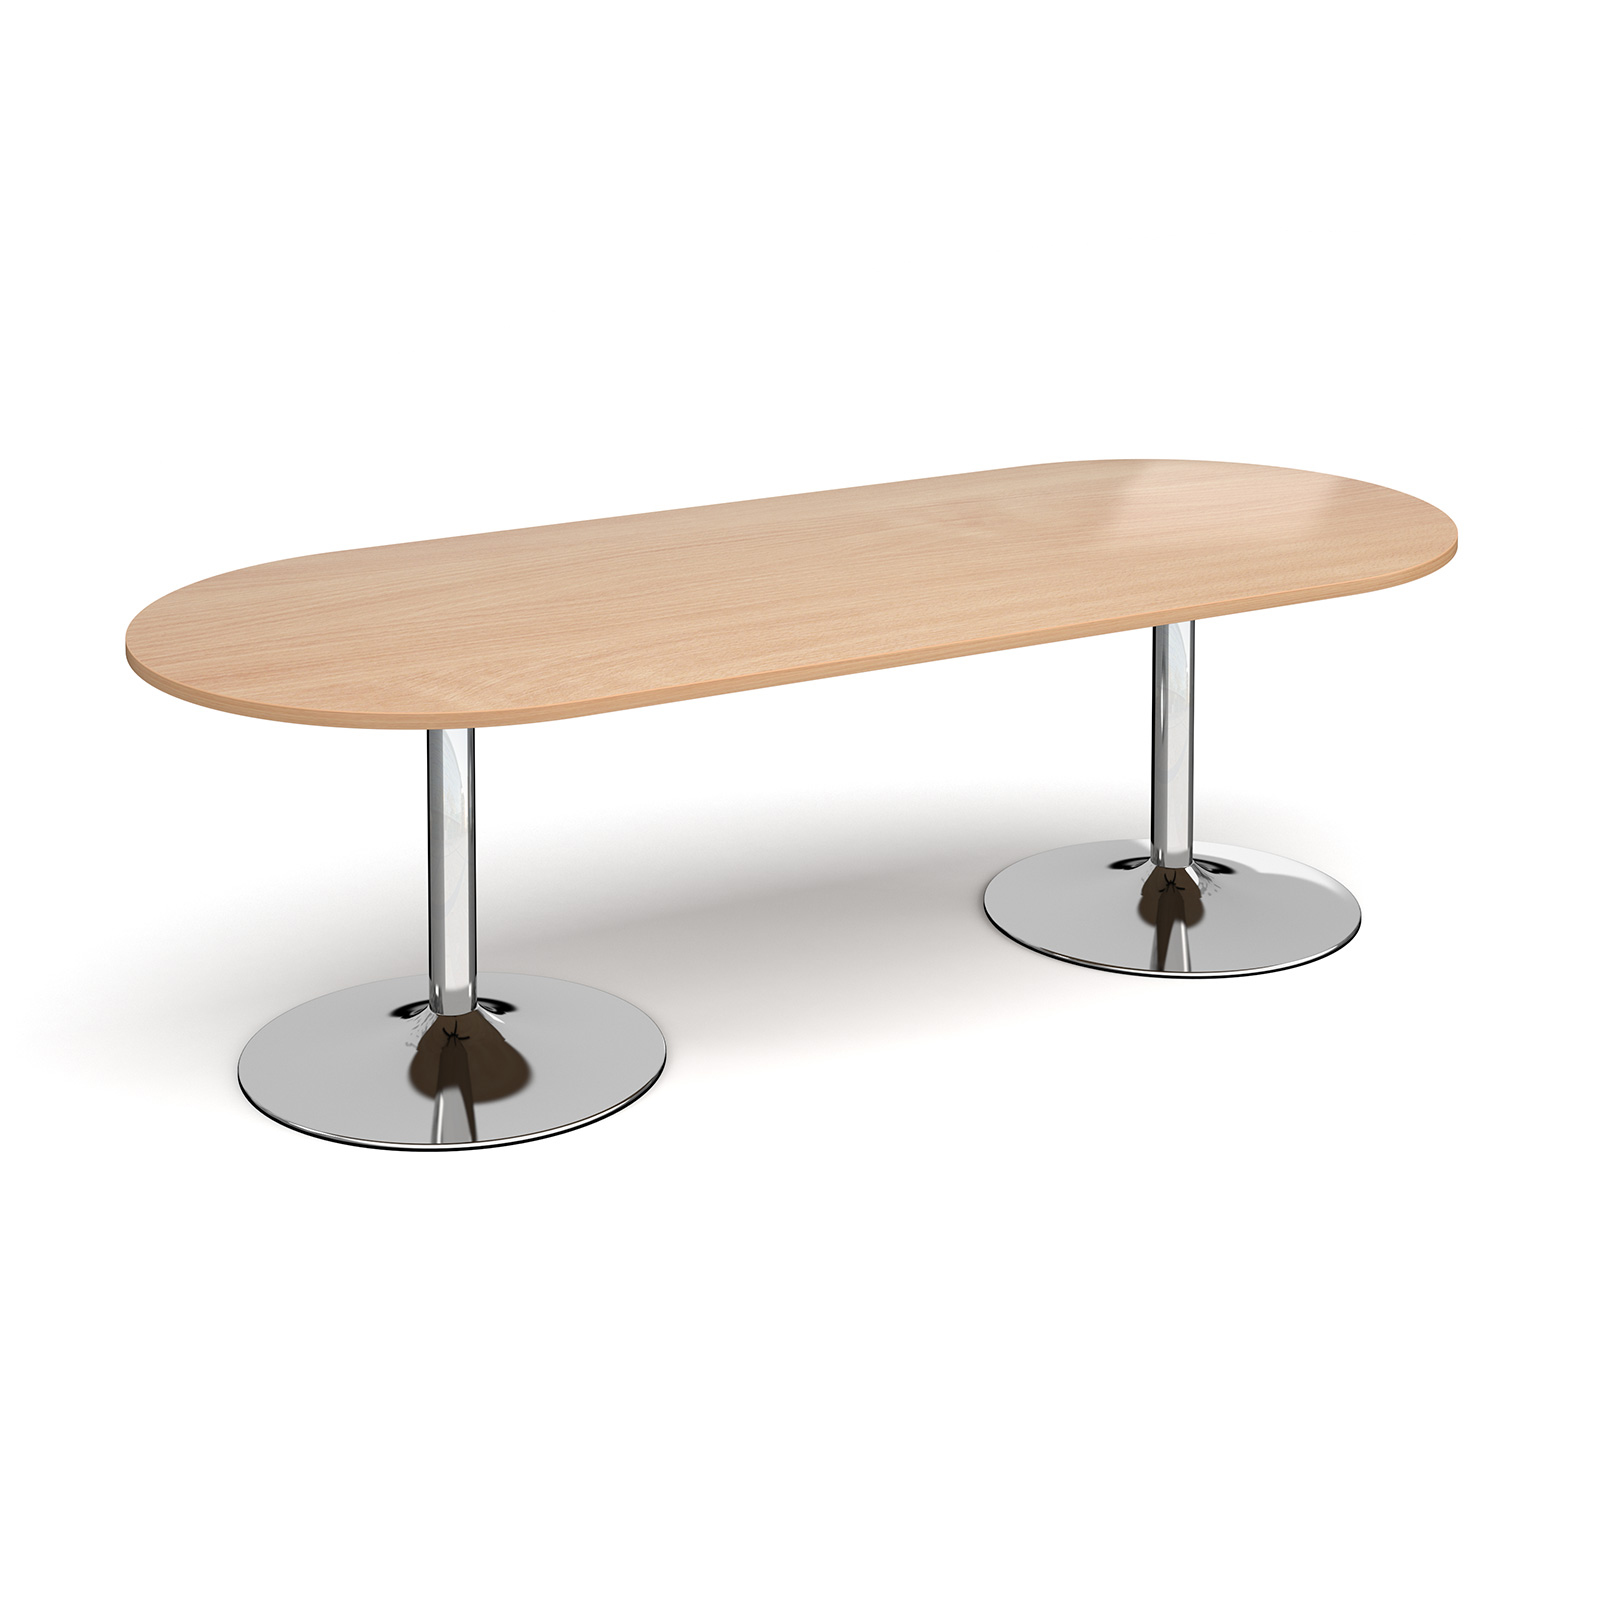 Trumpet base radial end boardroom table 2400mm x 1000mm - chrome base, beech top